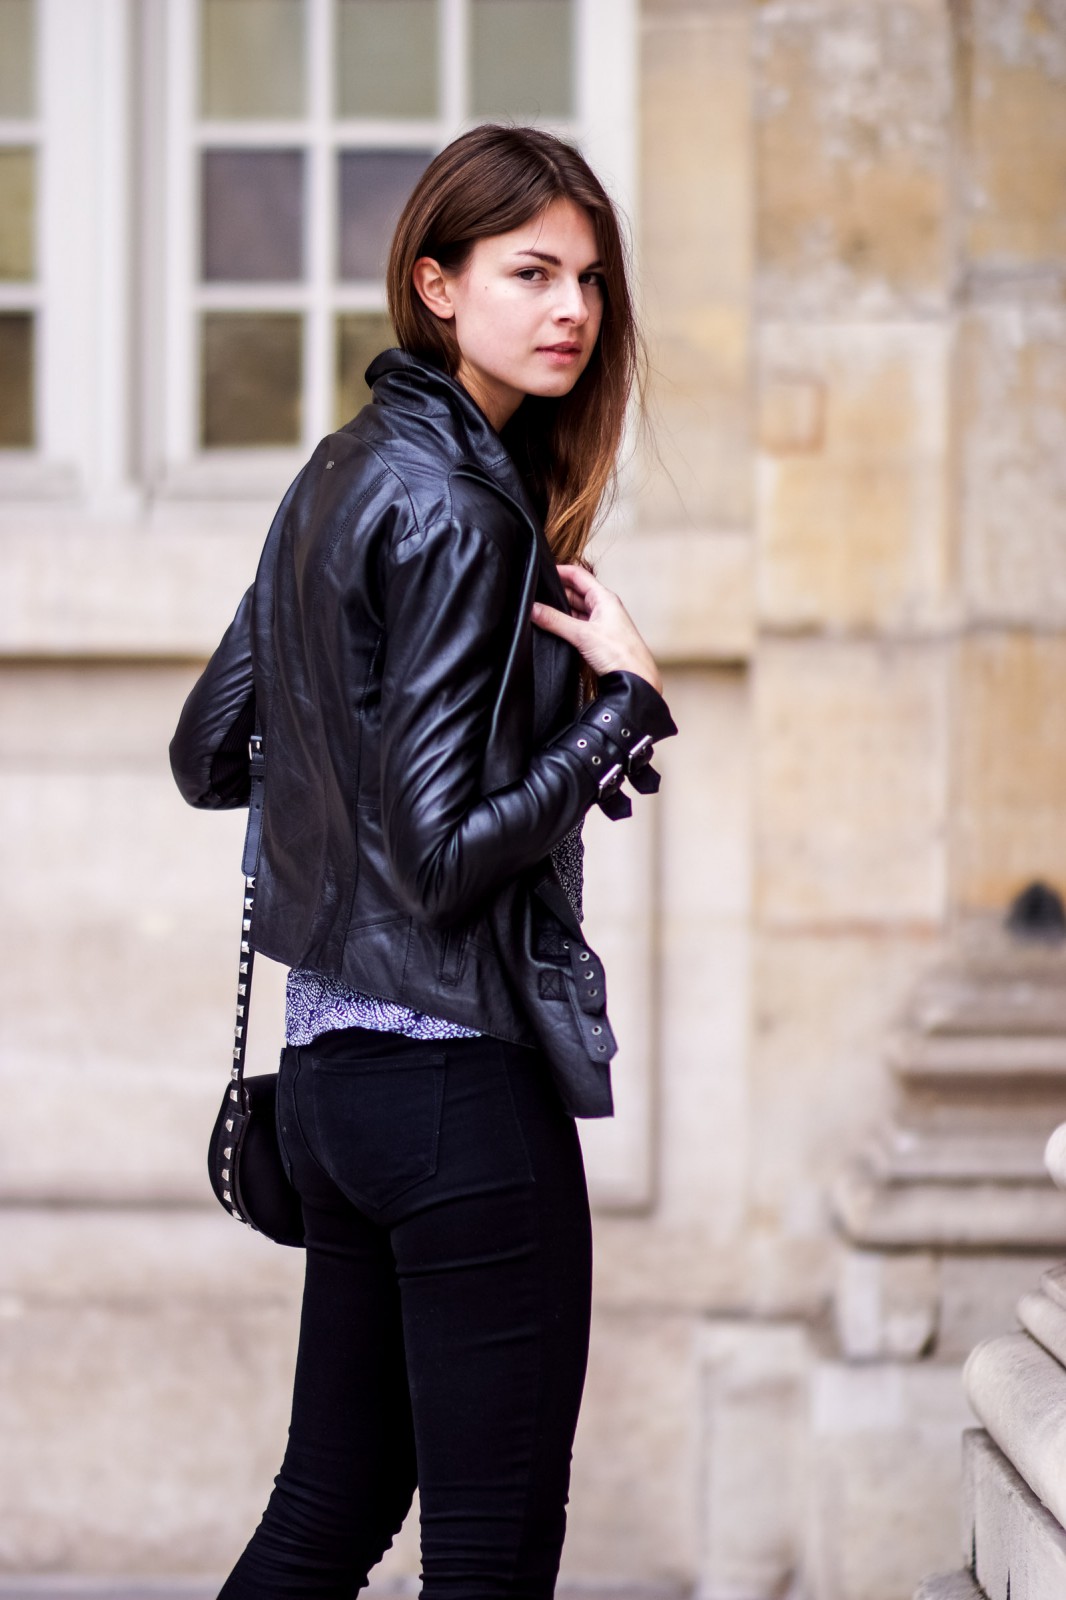 How to wear a leather jacket